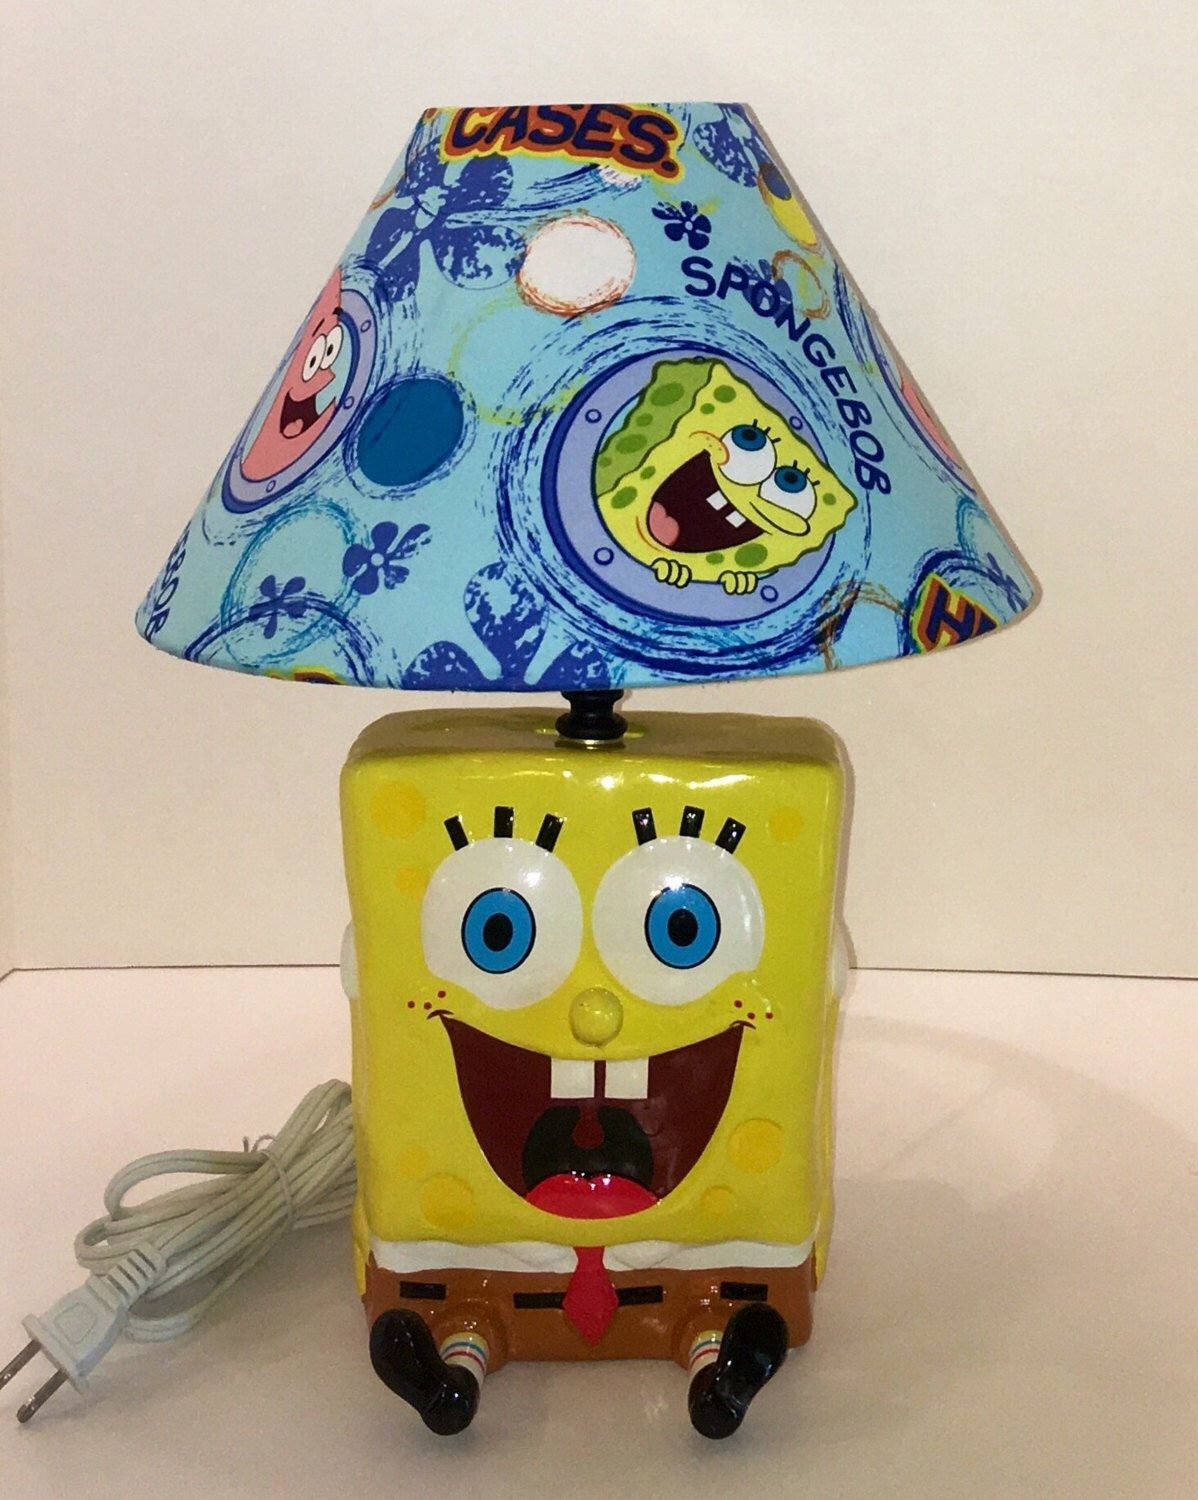 Custom made spongebob square pants lamp with images